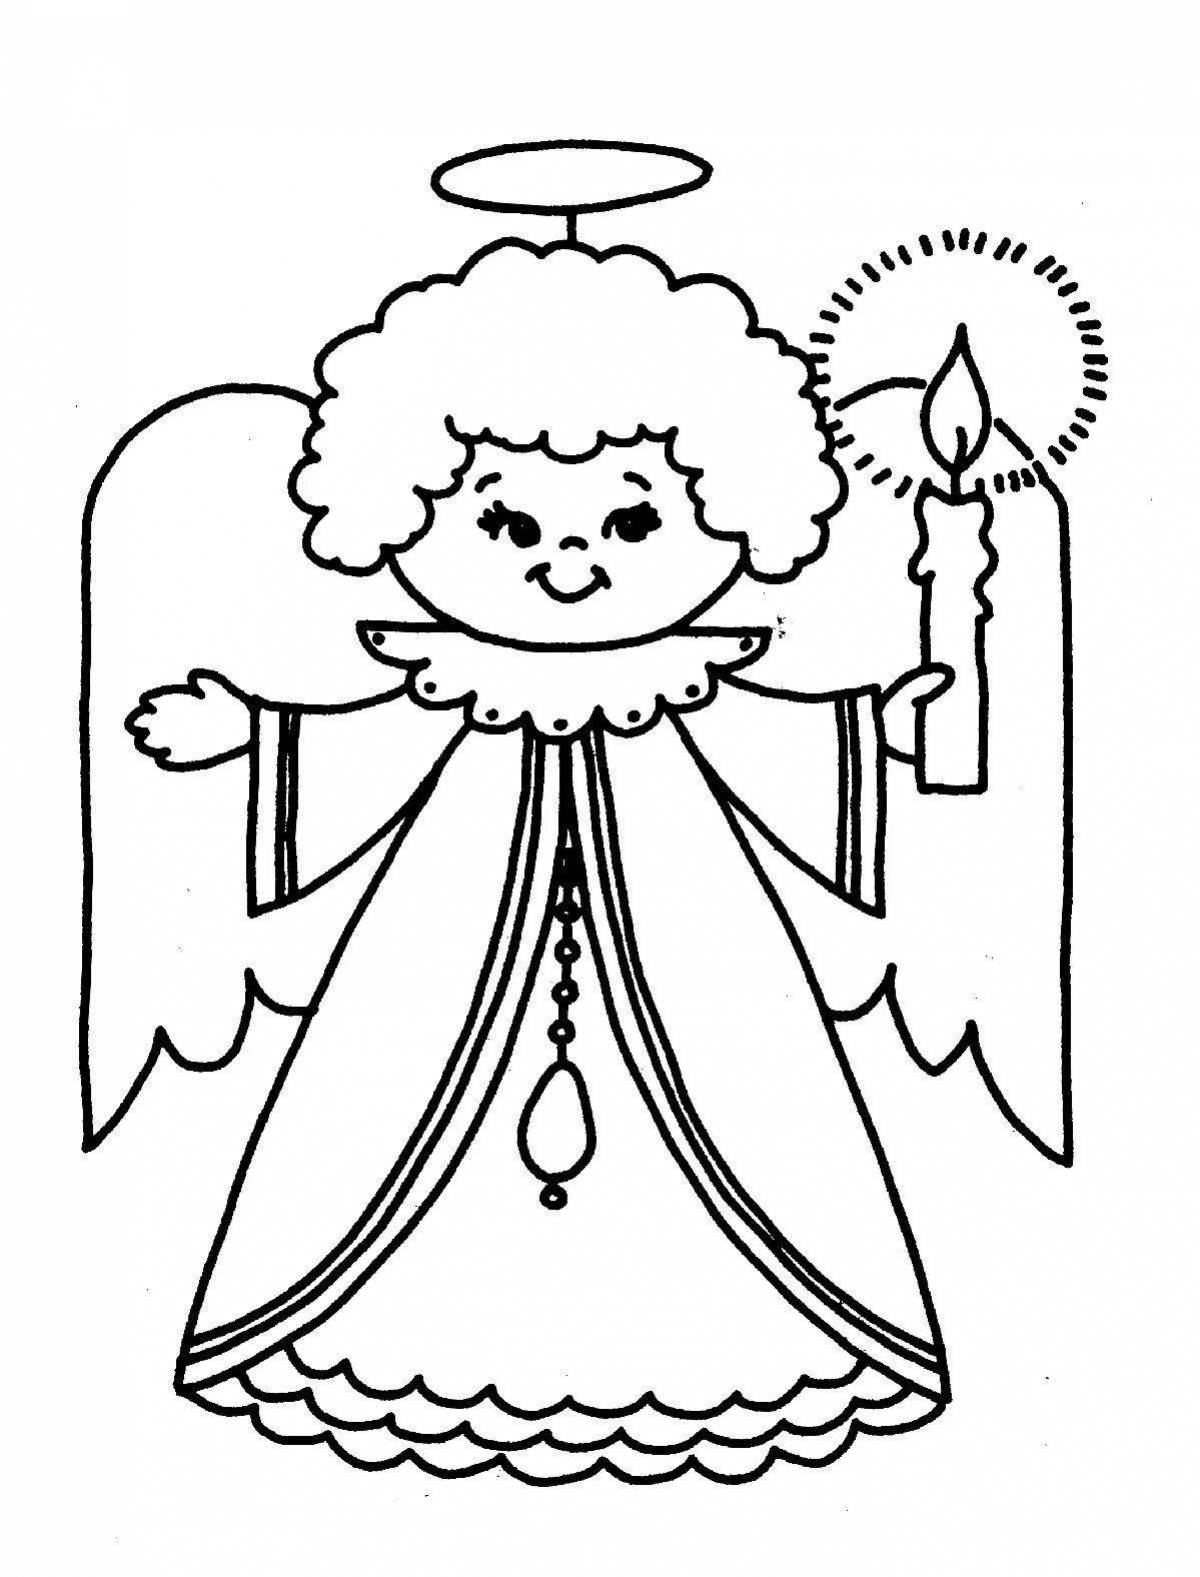 Merry christmas coloring pages for kids